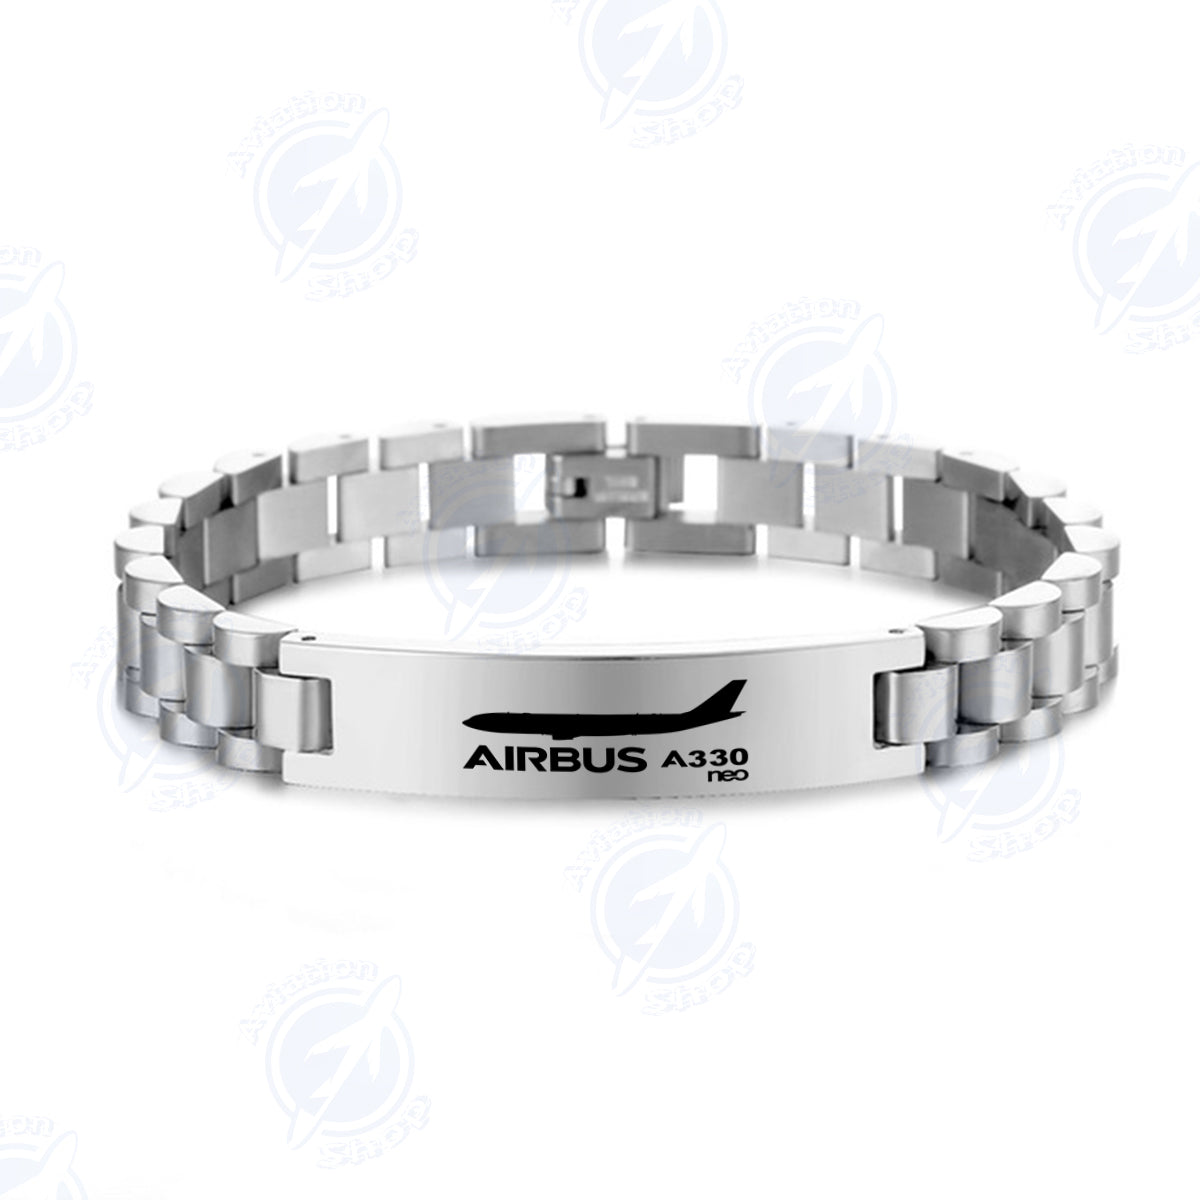 The Airbus A330neo Designed Stainless Steel Chain Bracelets